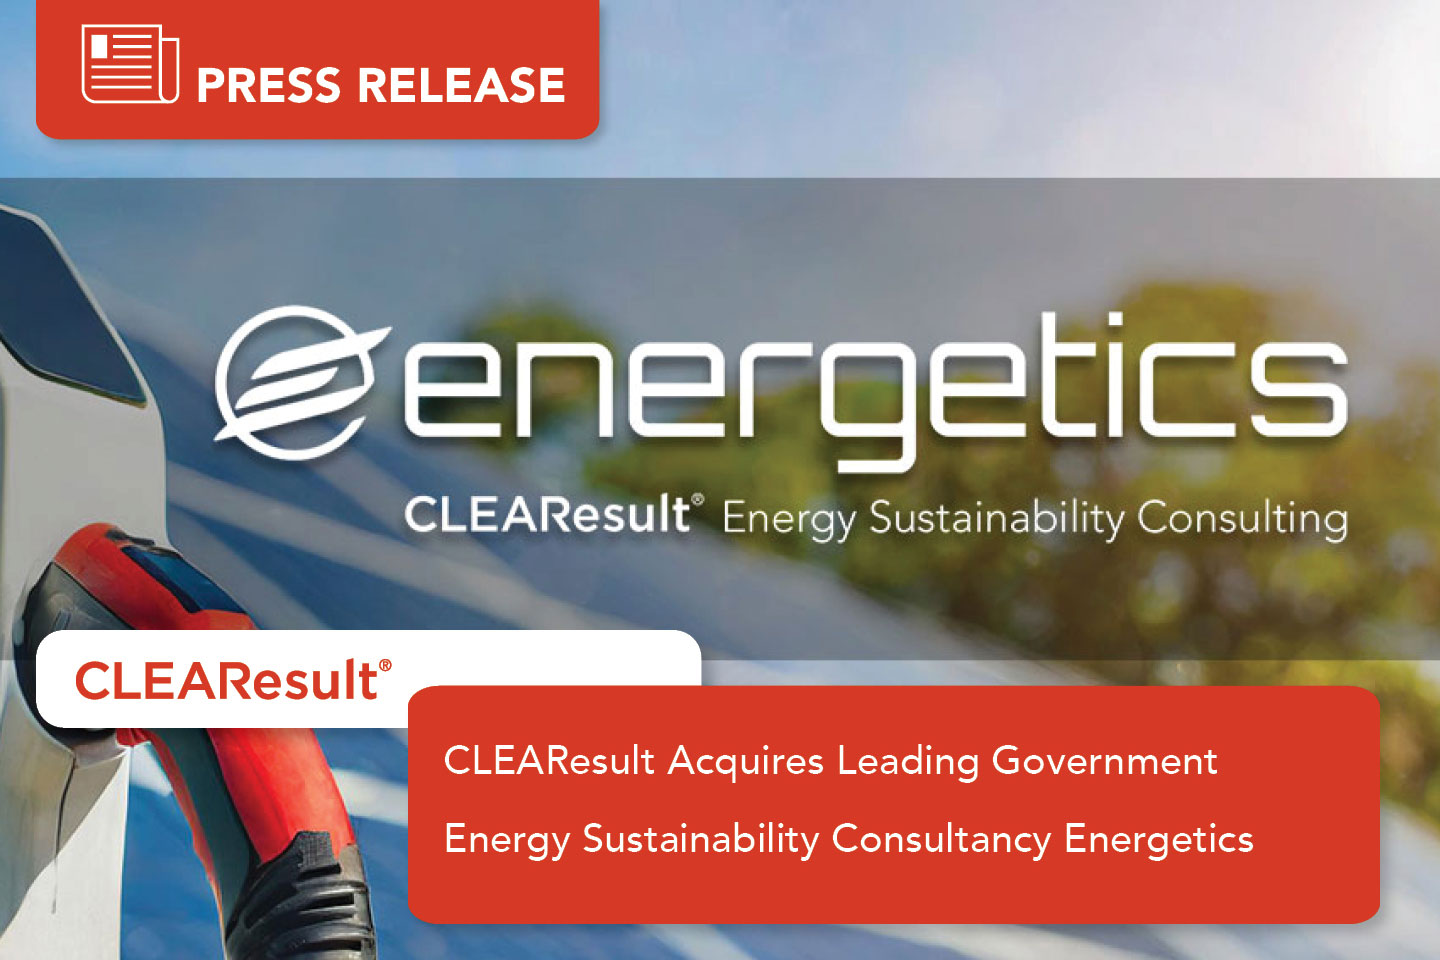 CLEAResult Acquires Leading Government Energy Sustainability Consultancy Energetics